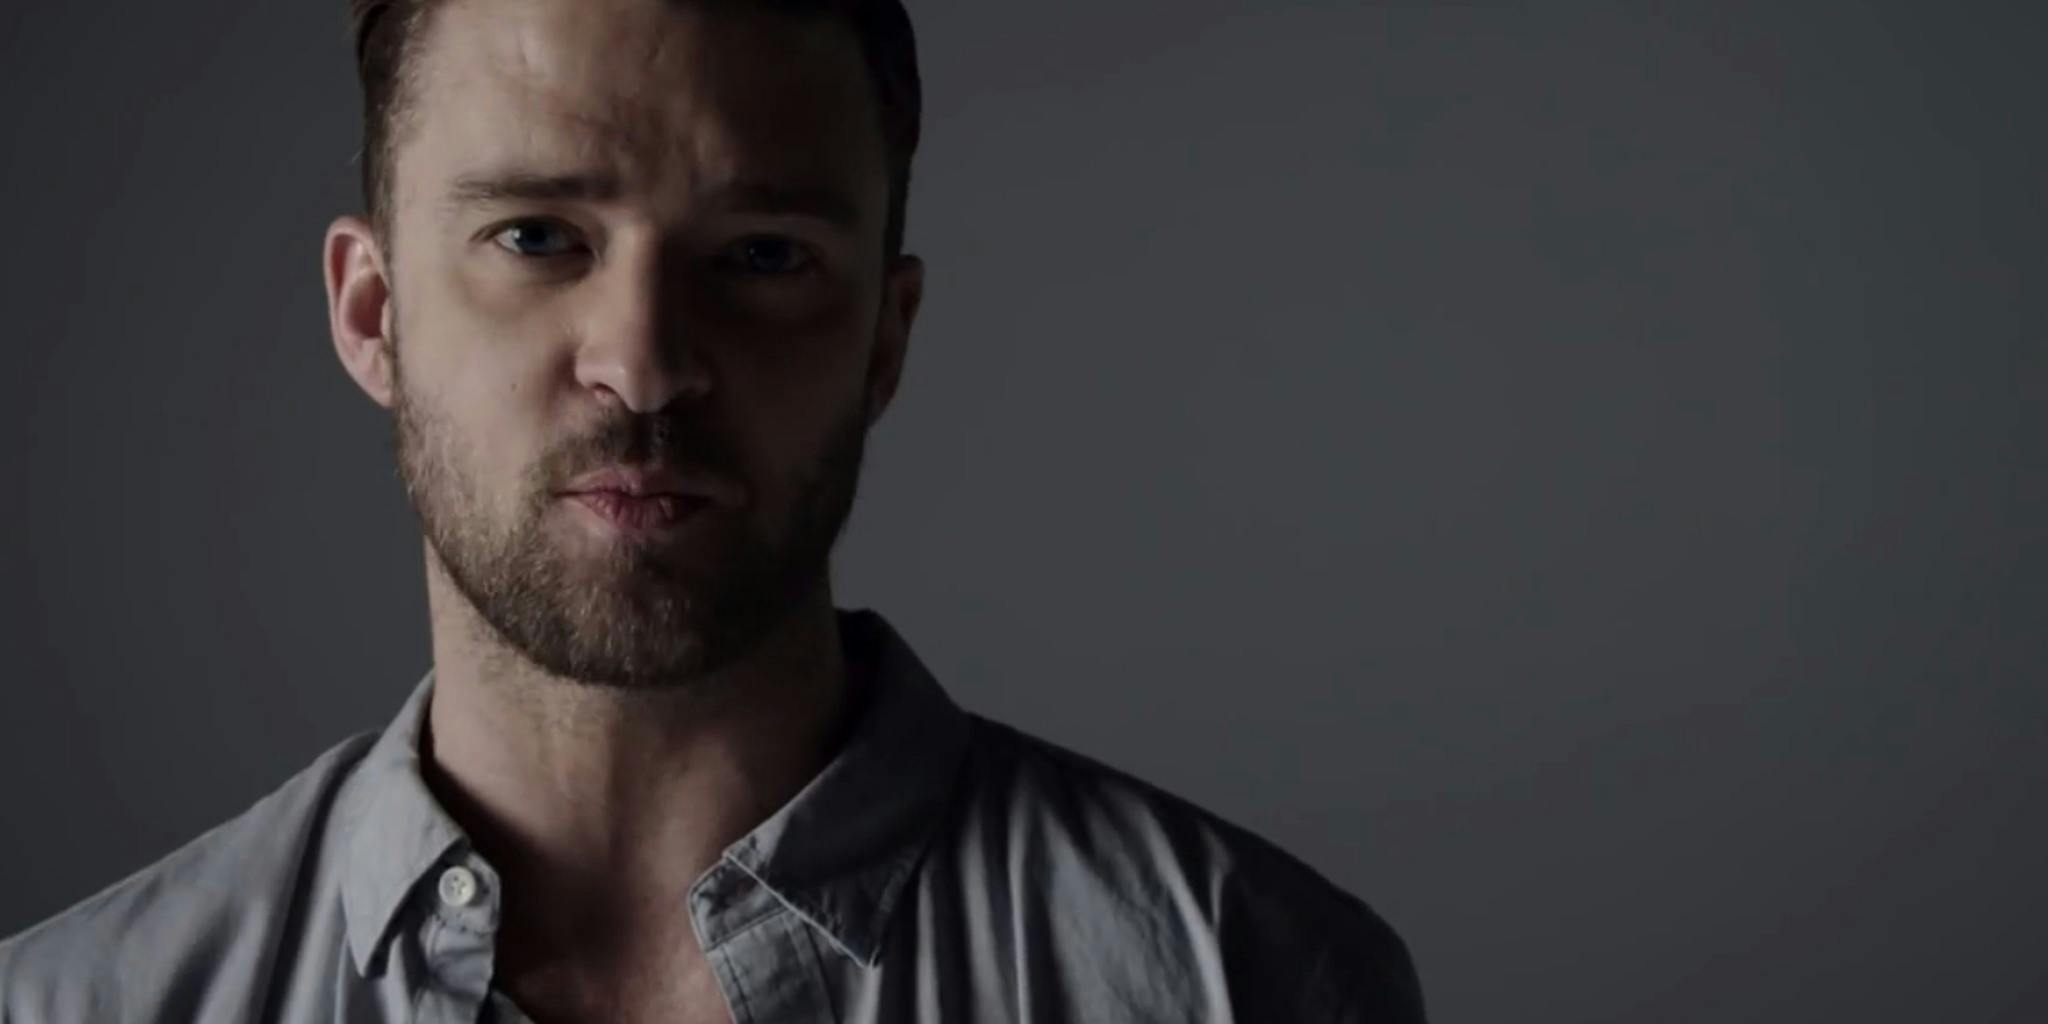 Justin Timberlake’s NSFW “Tunnel Vision” is back on YouTube